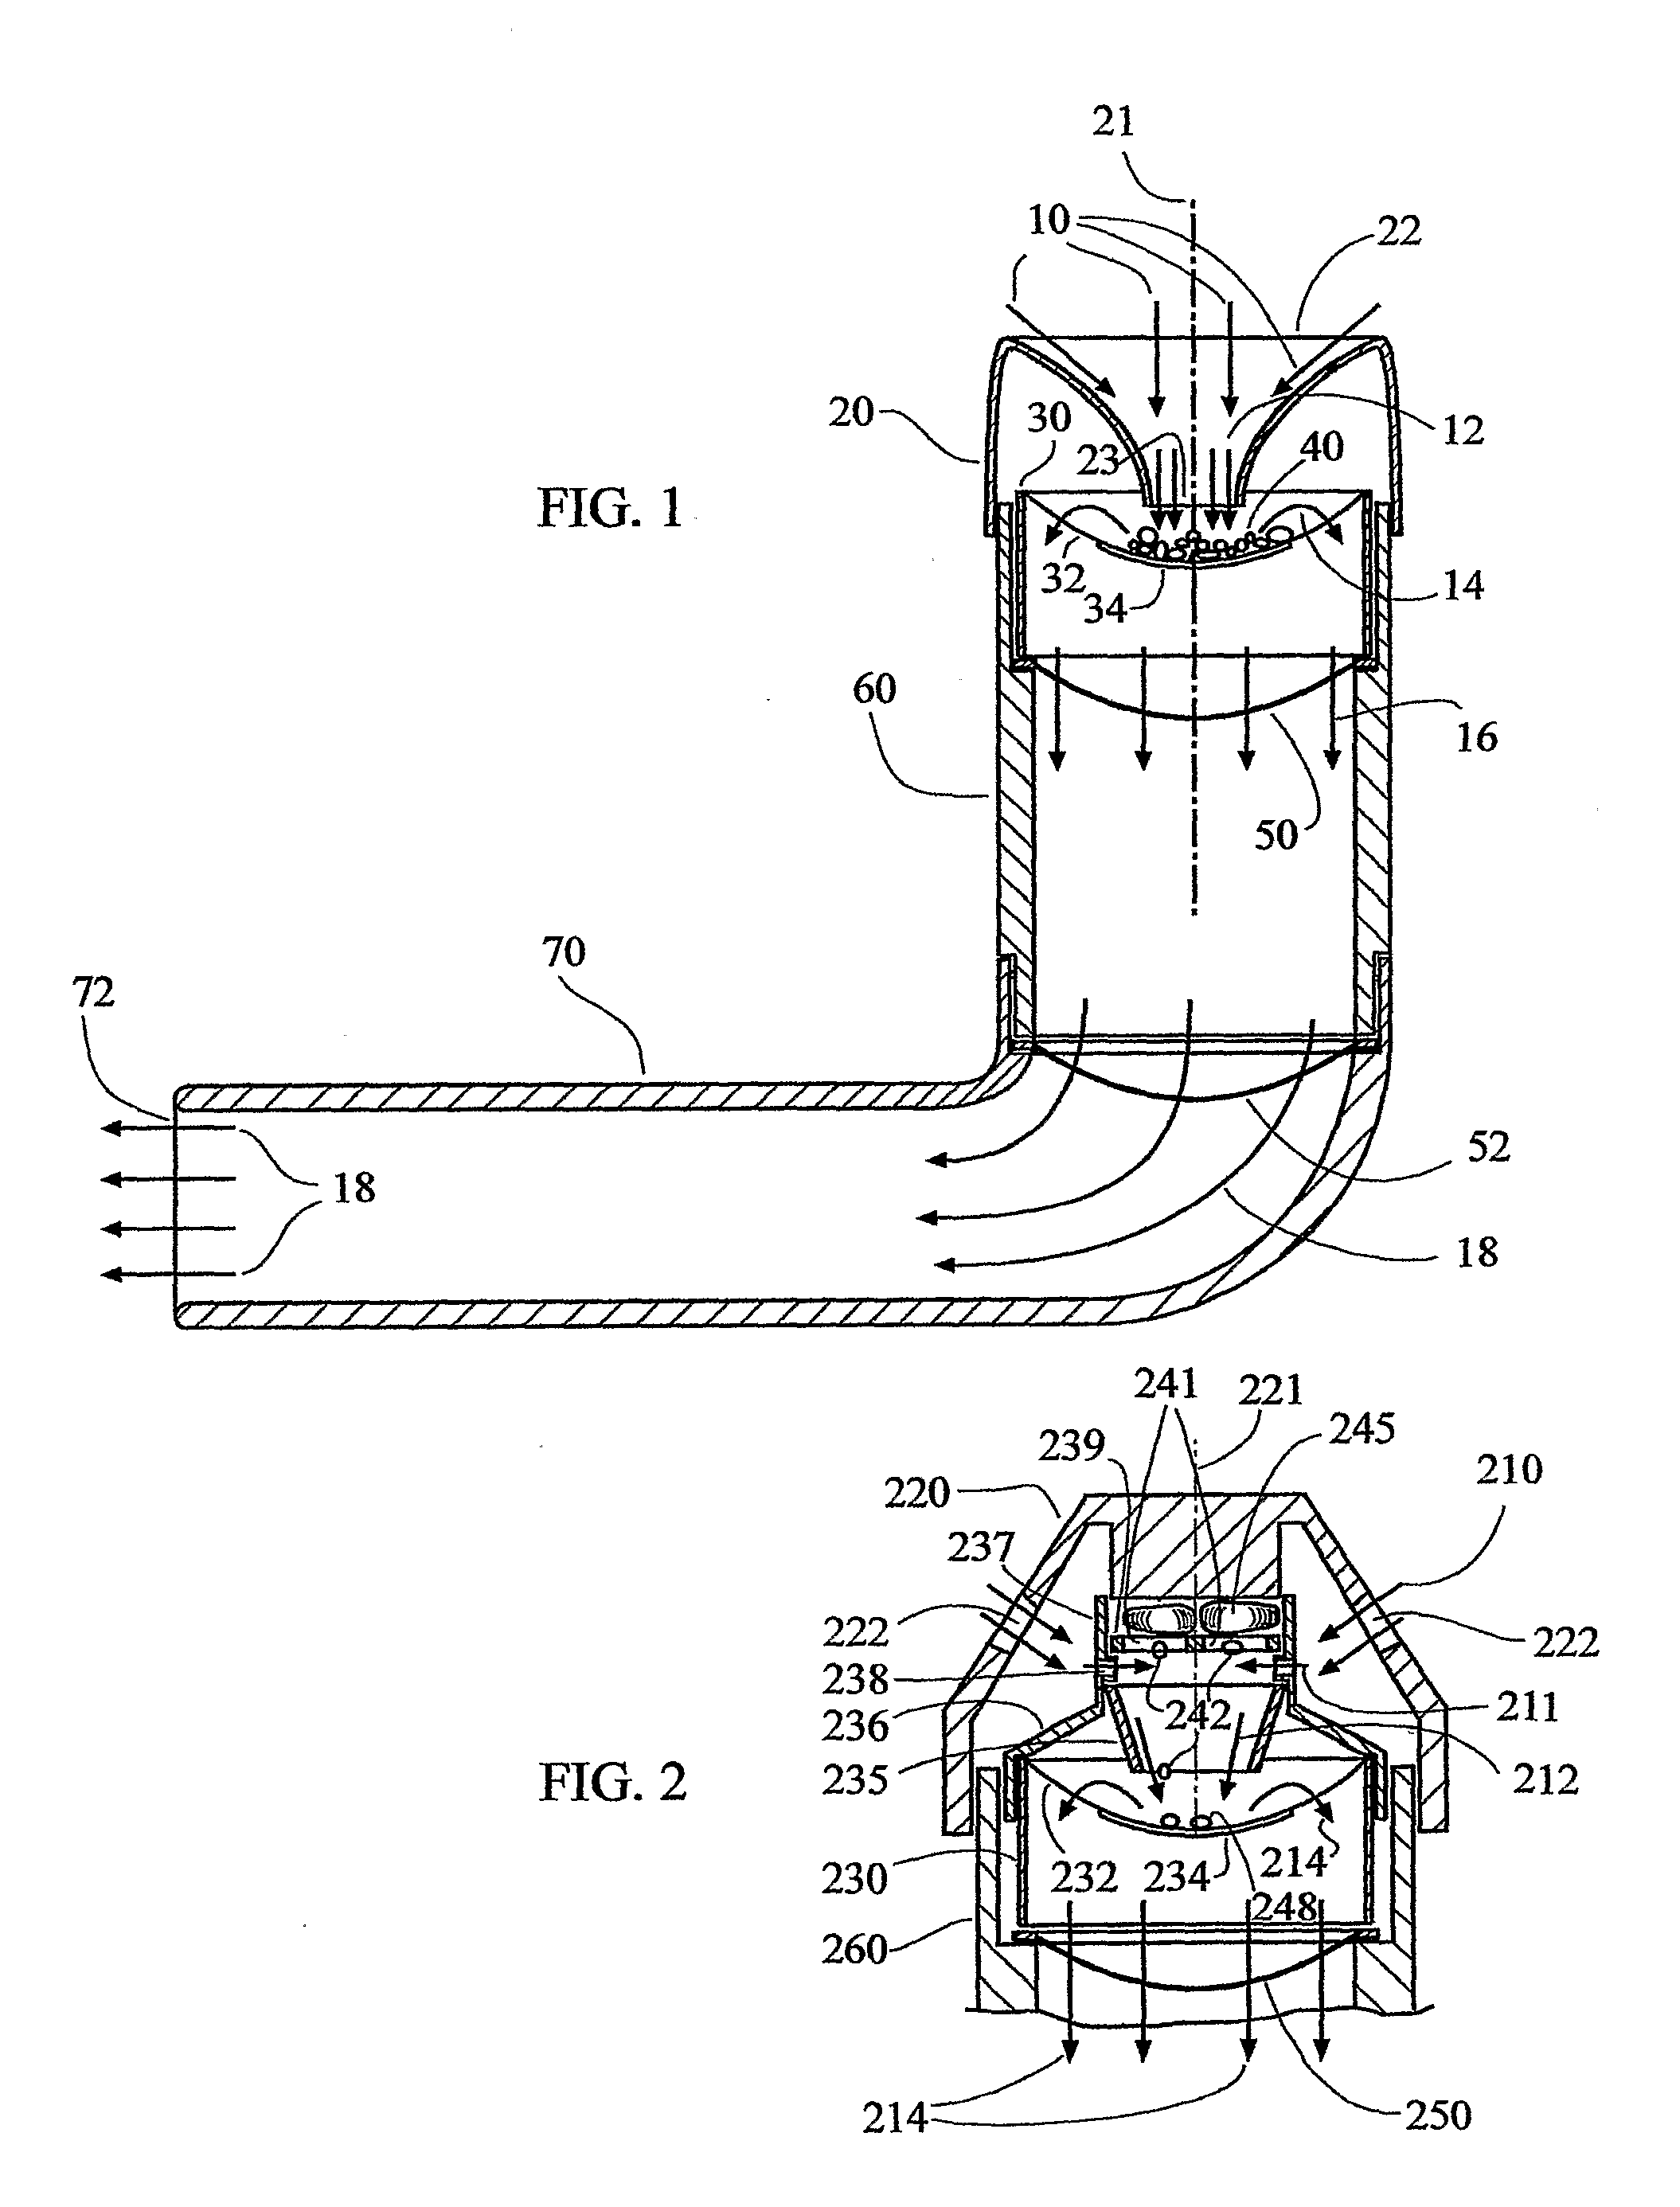 Device and method for treating respiratory and other diseases